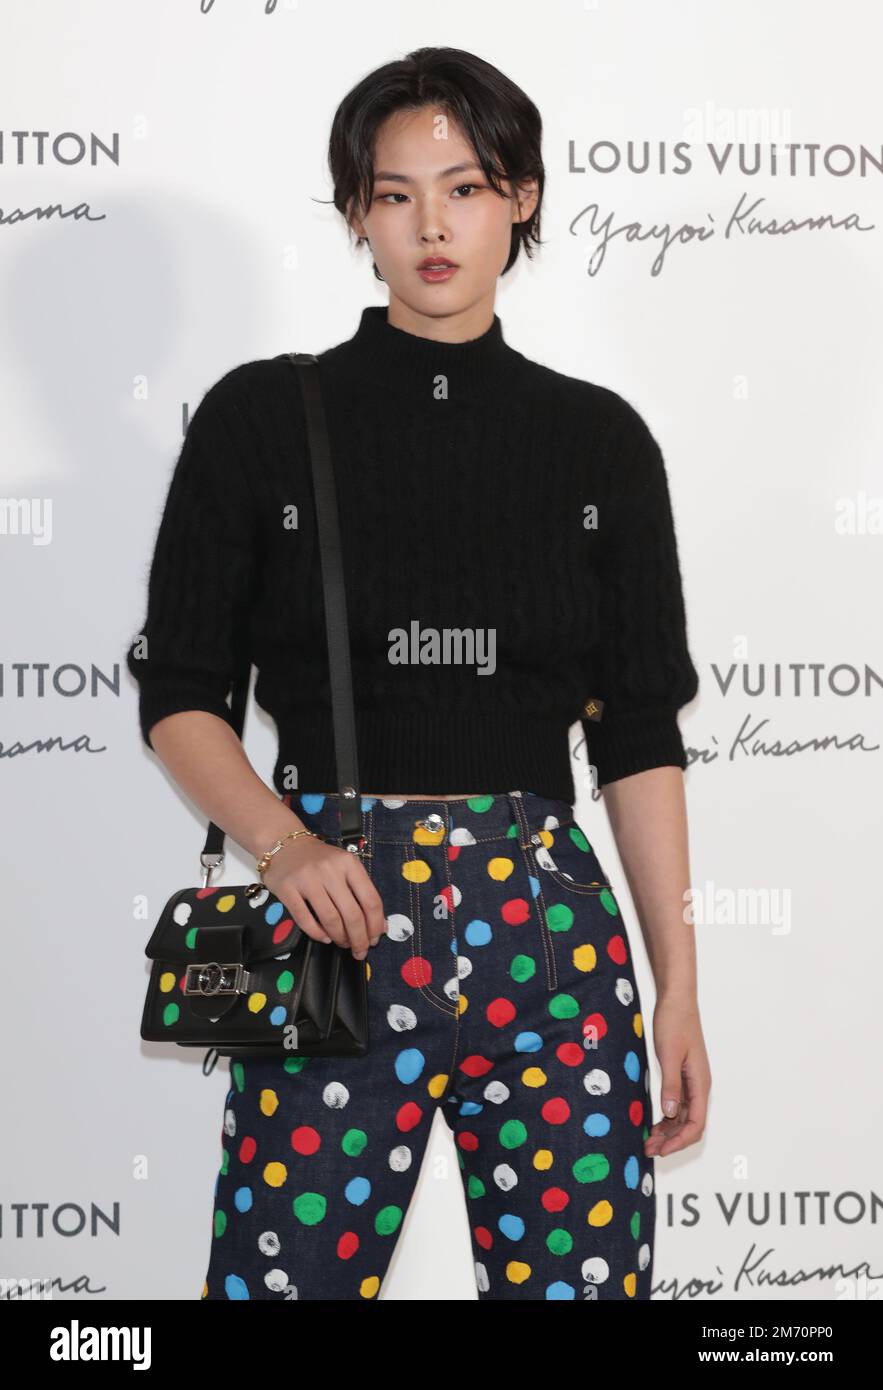 Han Yeseuls Outfit at the Louis Vuitton Event on October 30 2019   InkiStyle